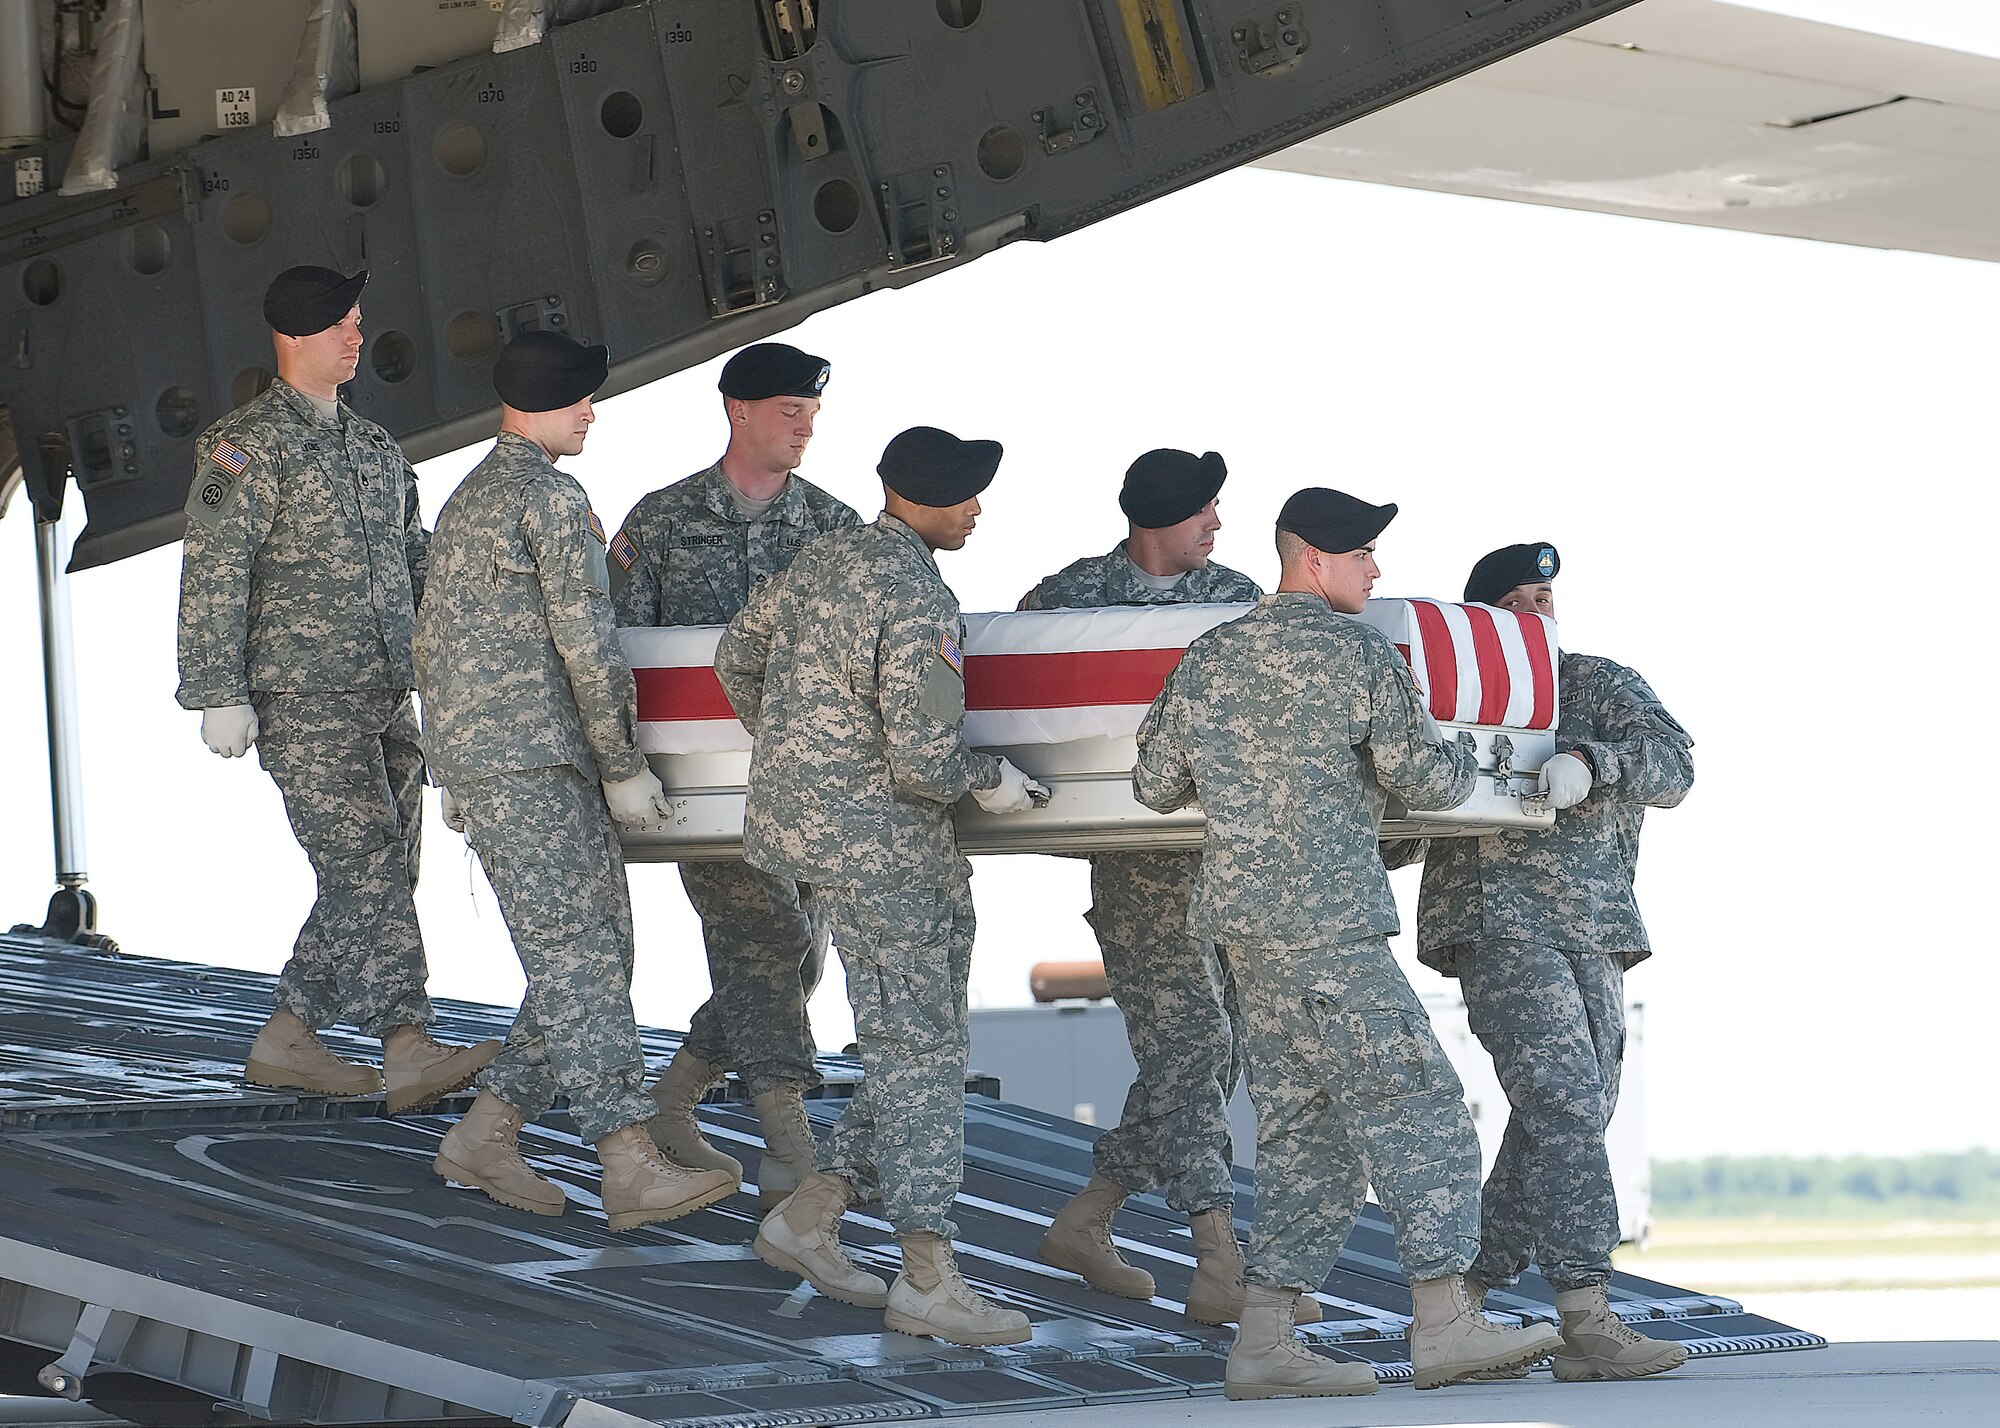 A U.S. Army carry team transfers the remains of Army SSgt Shane S. Barnard of Desmet, S.D., at Dover Air Force Base, Del., on May 20, 2010.  (U.S. Air Force photo/Brianne Zimny)